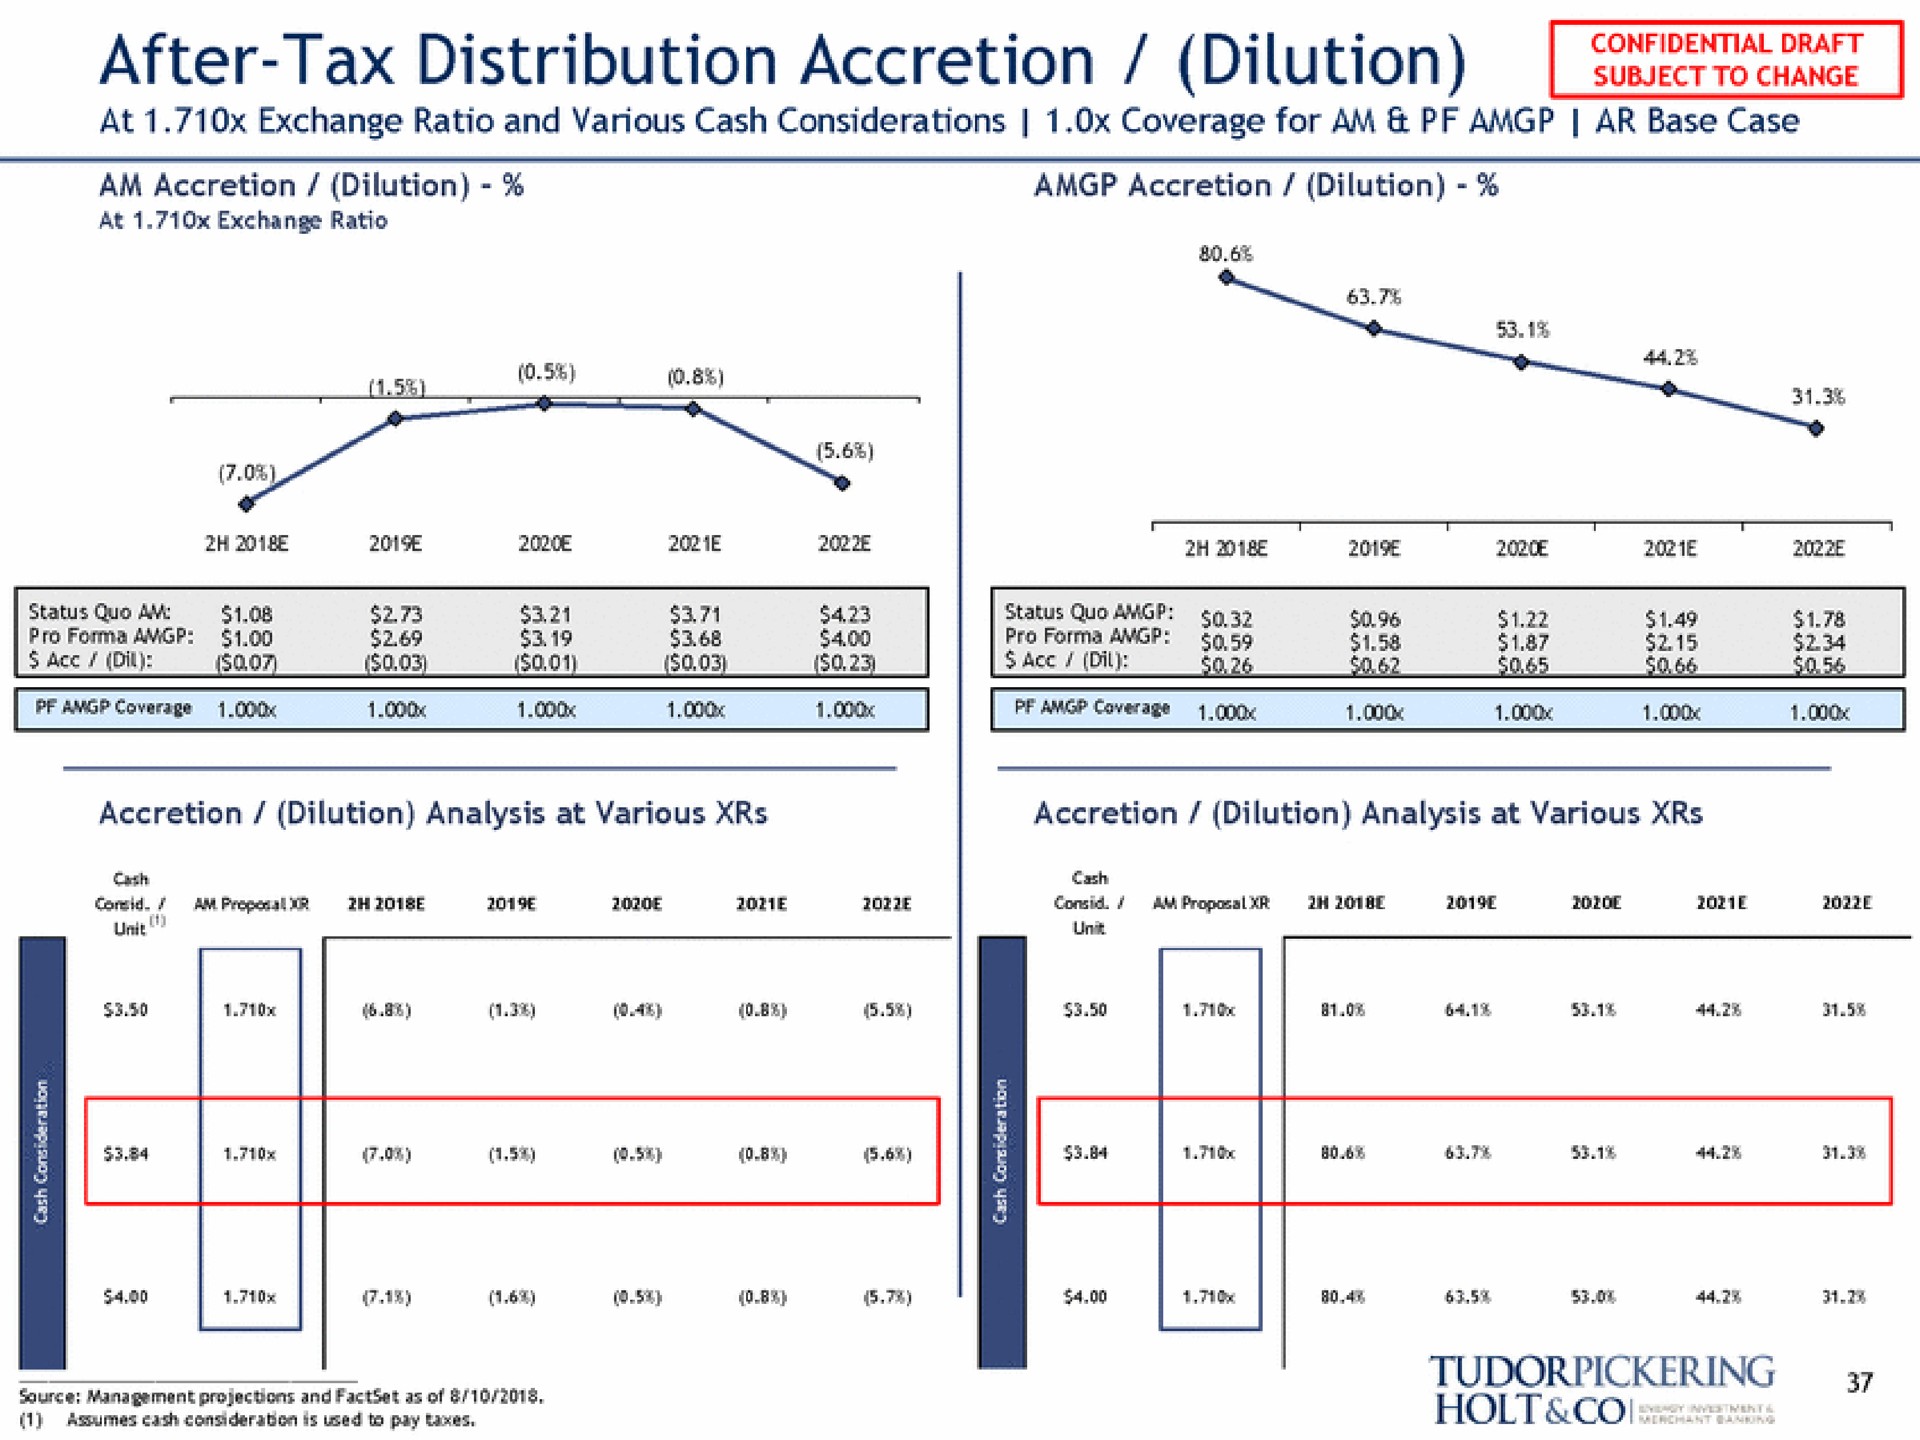 after tax distribution accretion dilution am accretion dilution accretion dilution | Tudor, Pickering, Holt & Co